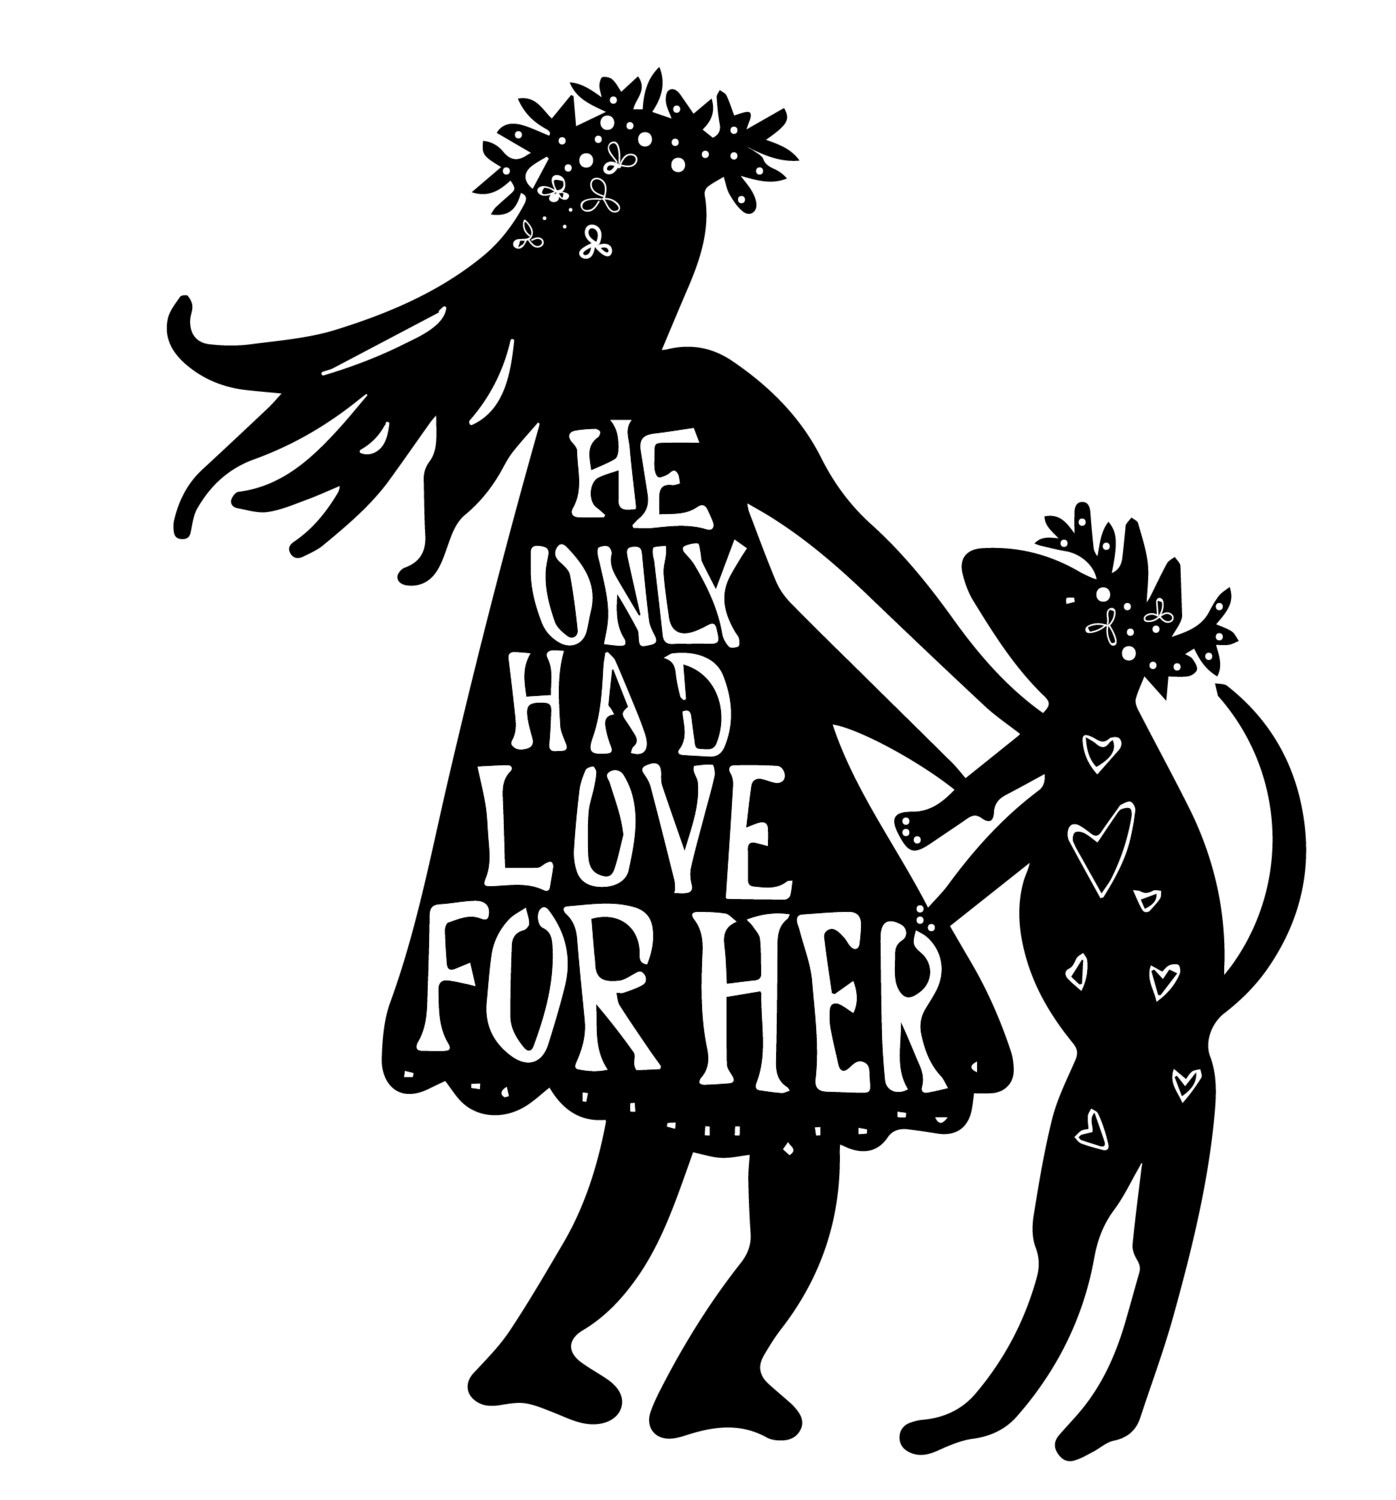 He only had love for her - archive PRINT